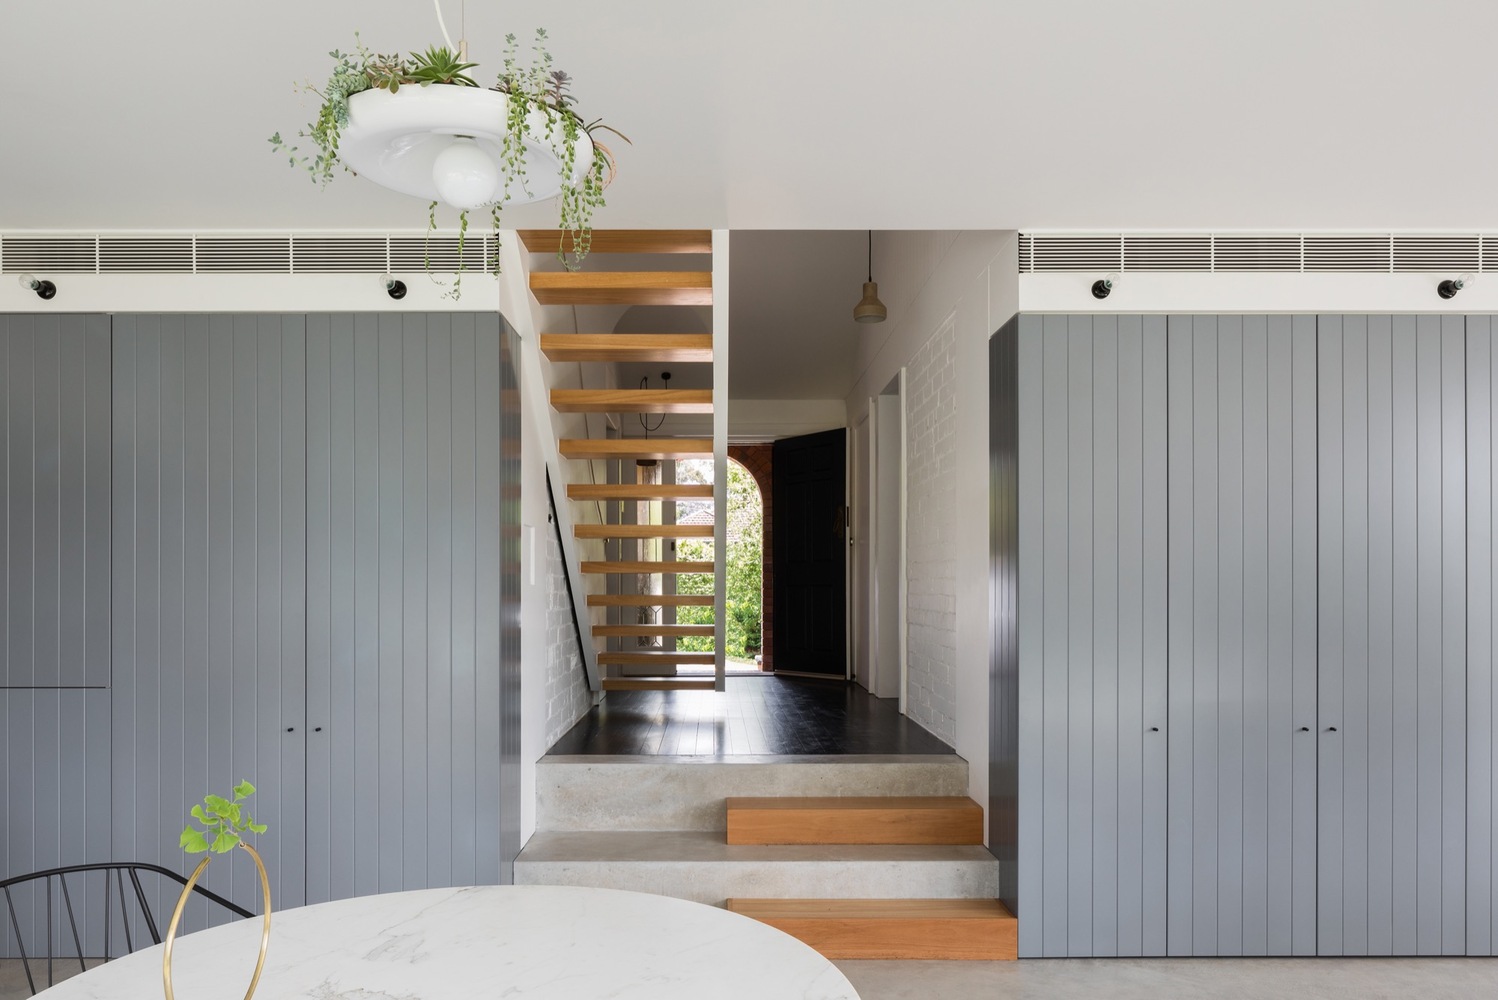 A Quirky Renovation Beautifully Reinterprets this 1930s Bungalow